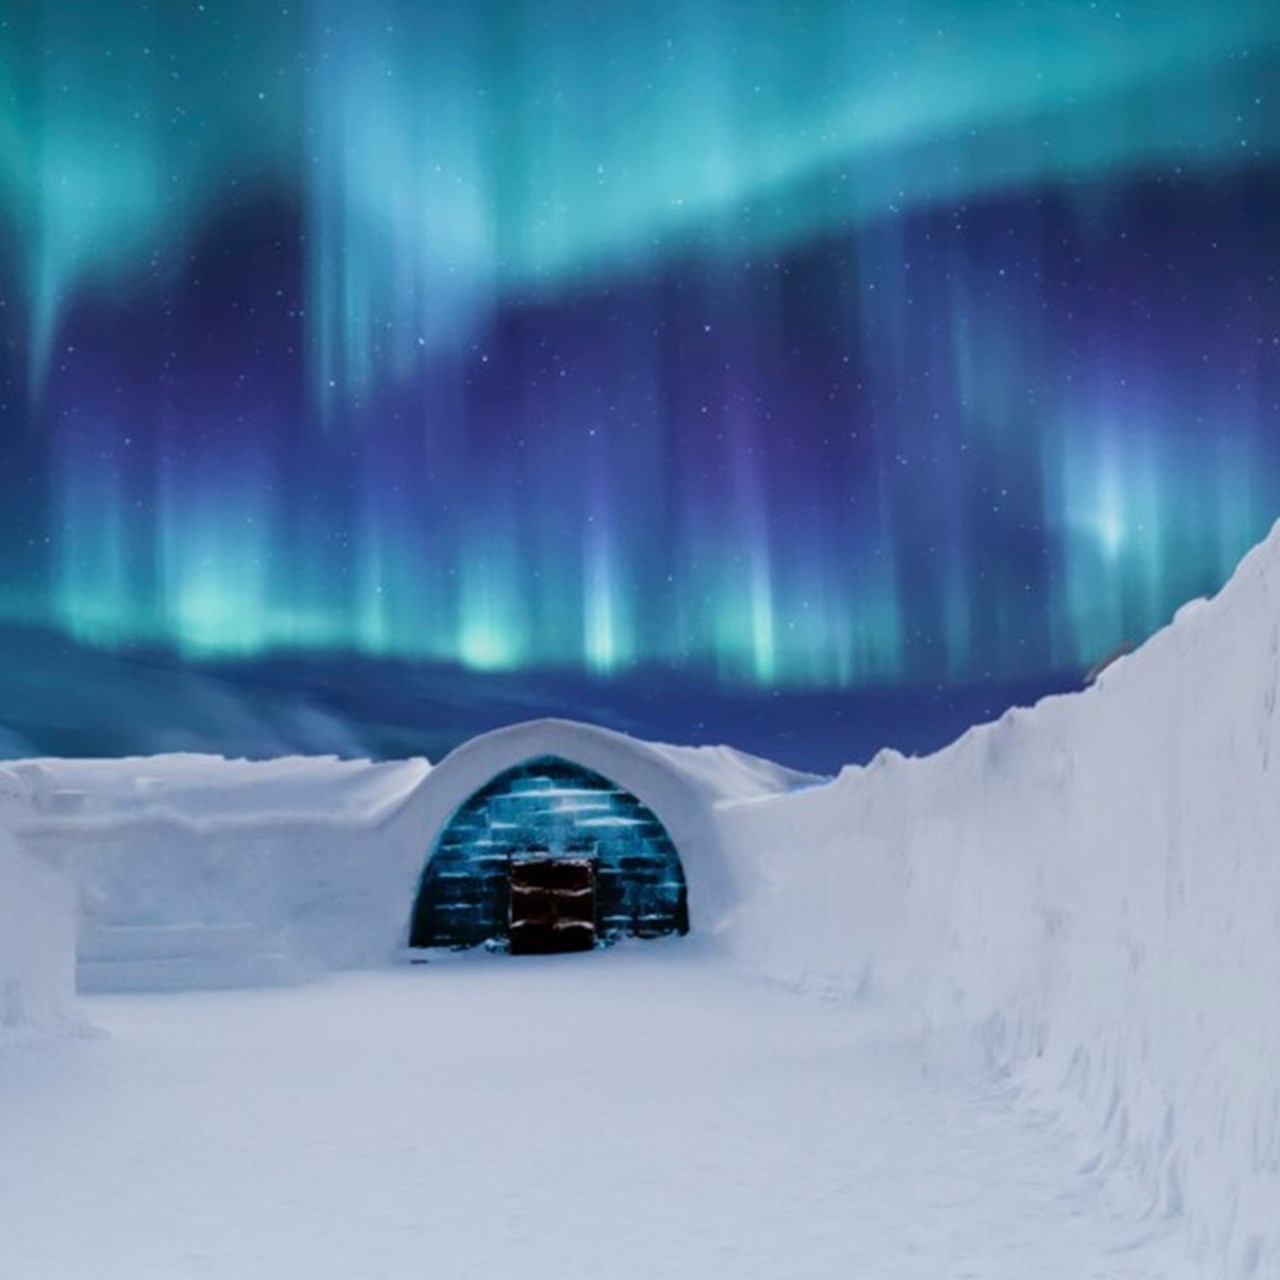 A snow building with a wooden door, high snow edges and a dark blue sky with northern lights.